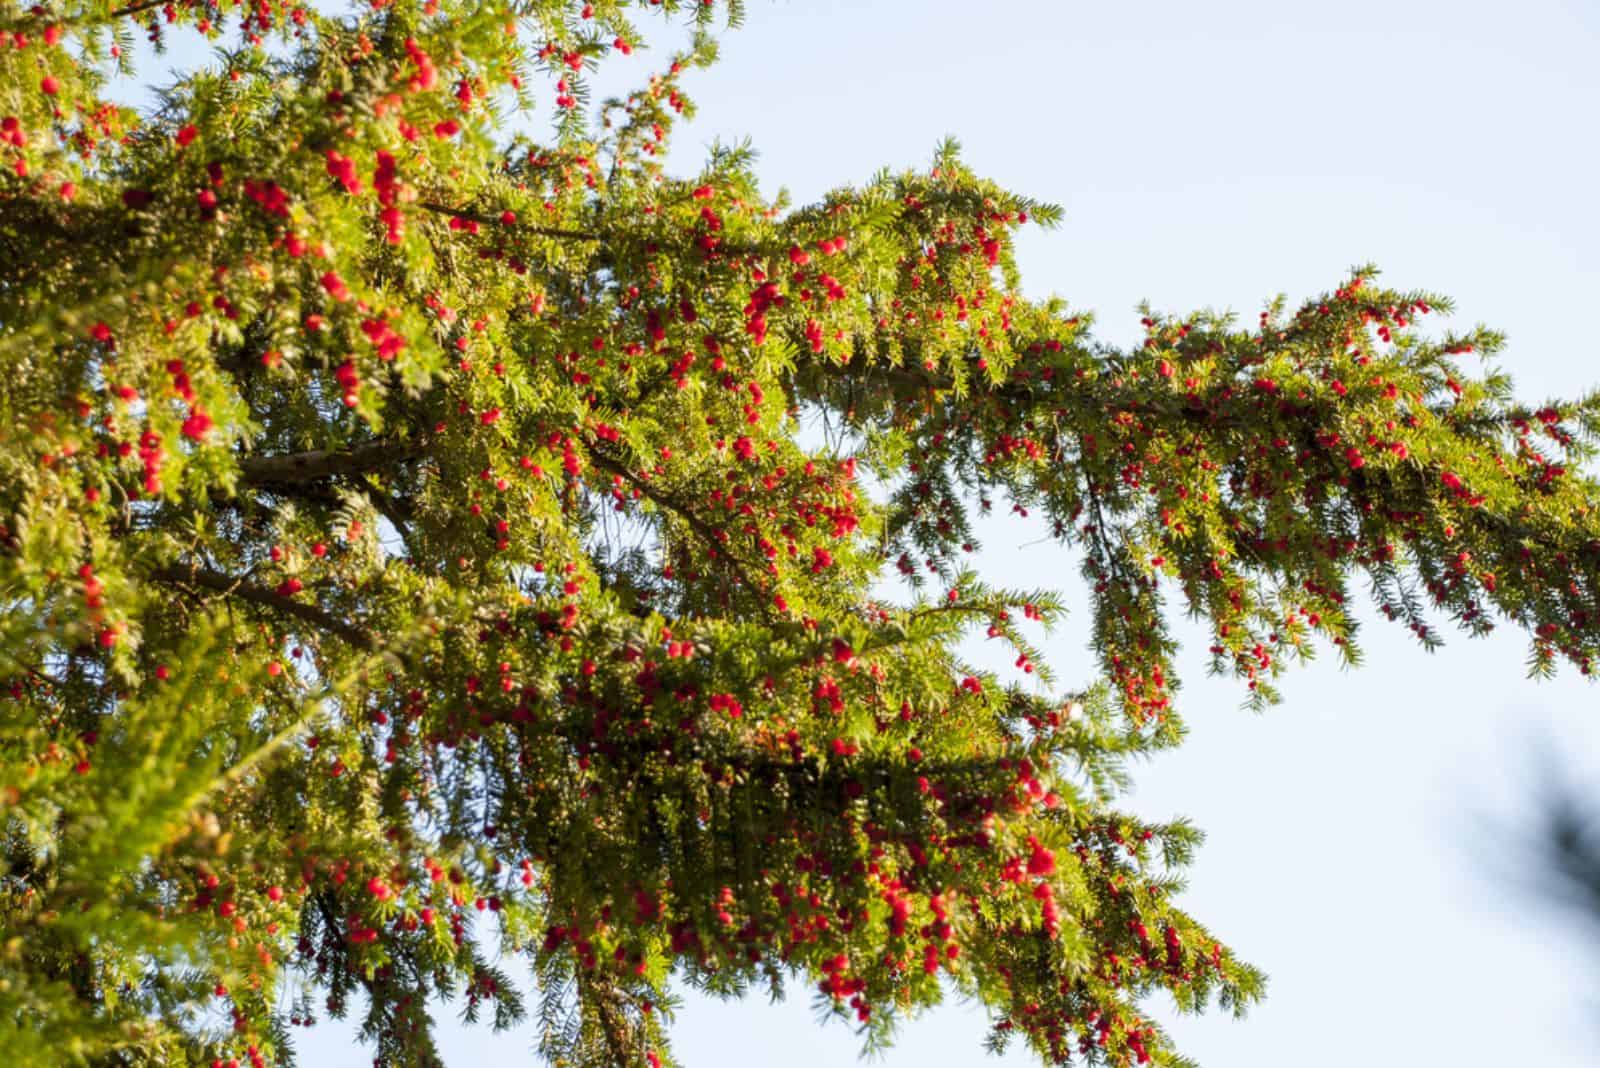 Yew tree (Taxus baccata) with red berries.